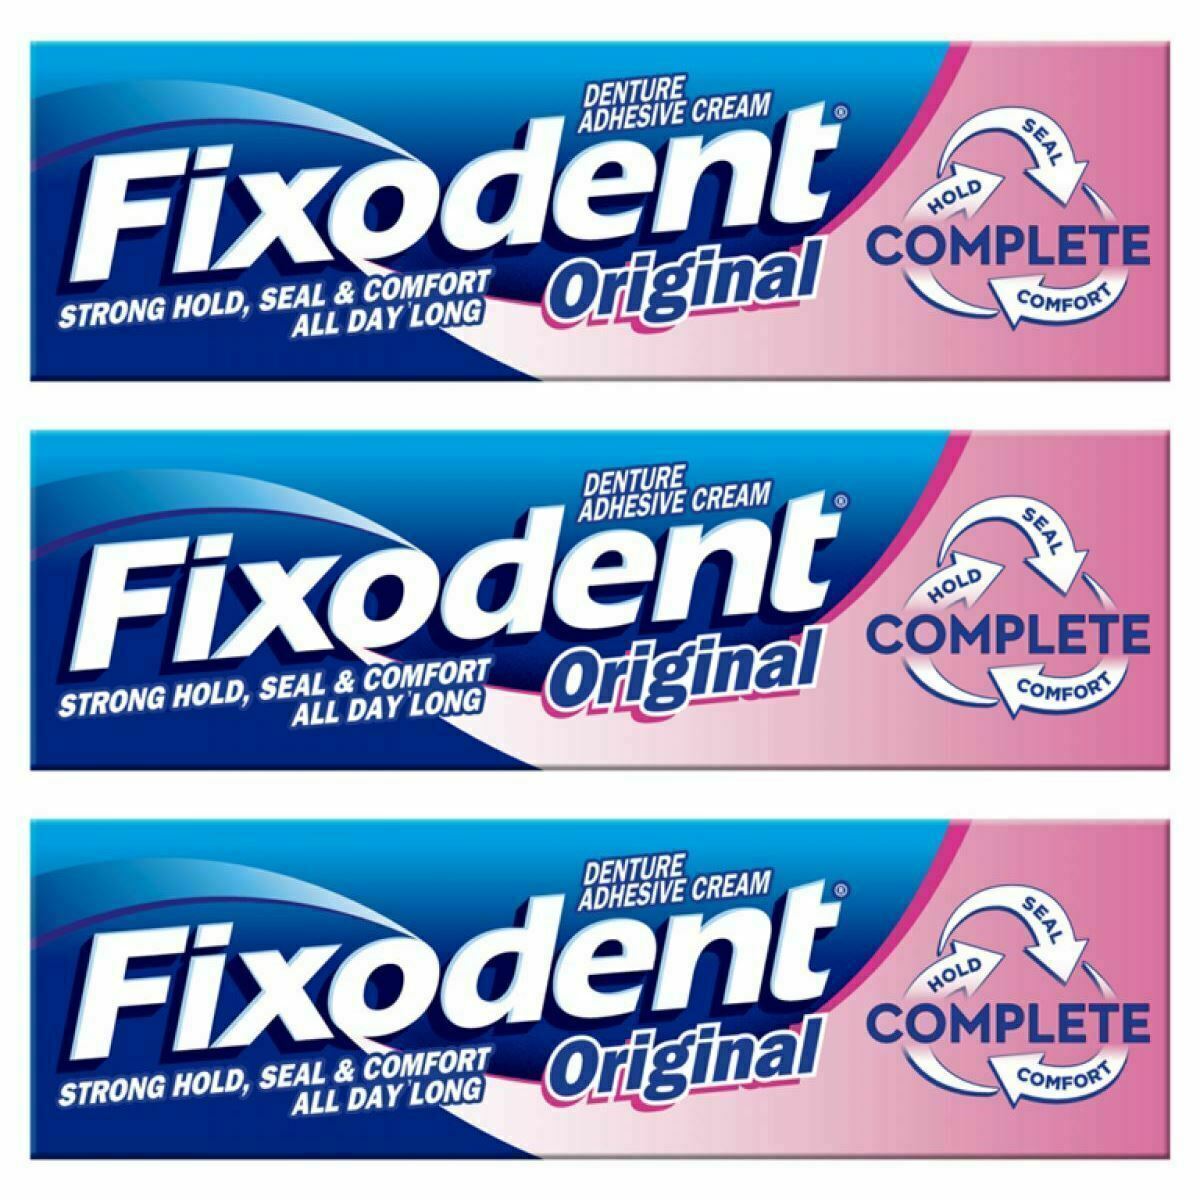 3 x  Fixodent Original Complete Denture Adhesive Cream Strong Food Seal 47g